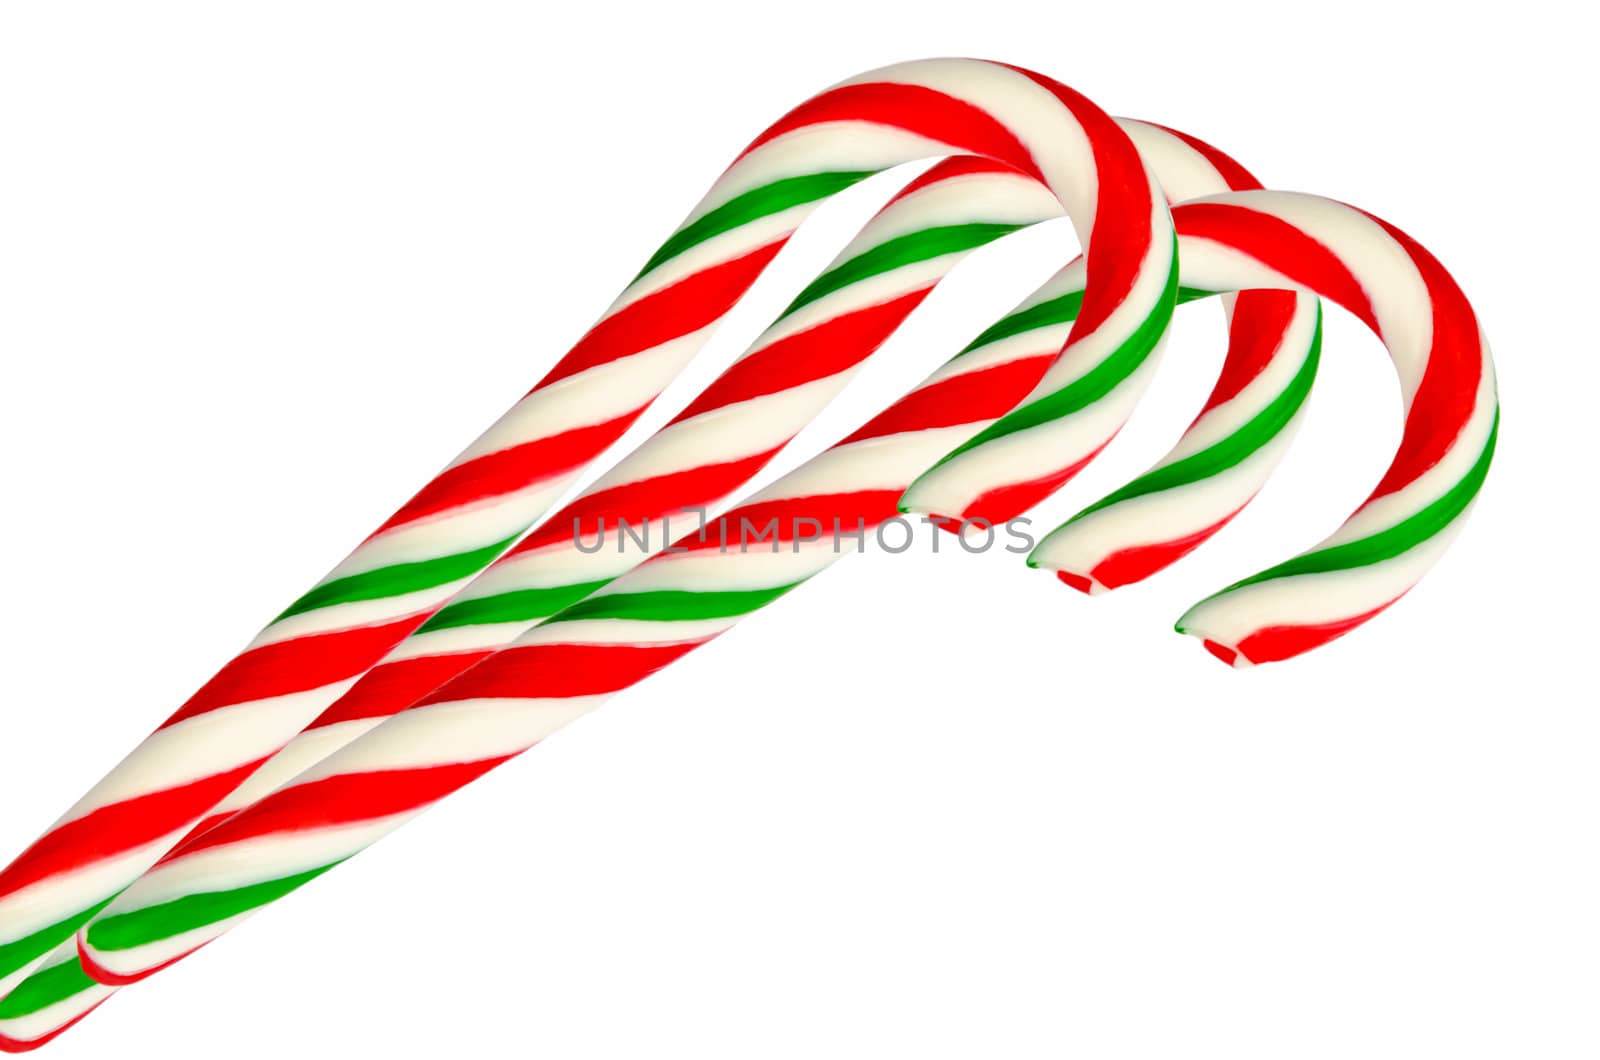 Three sugar sticks in white green and red isolated on white background